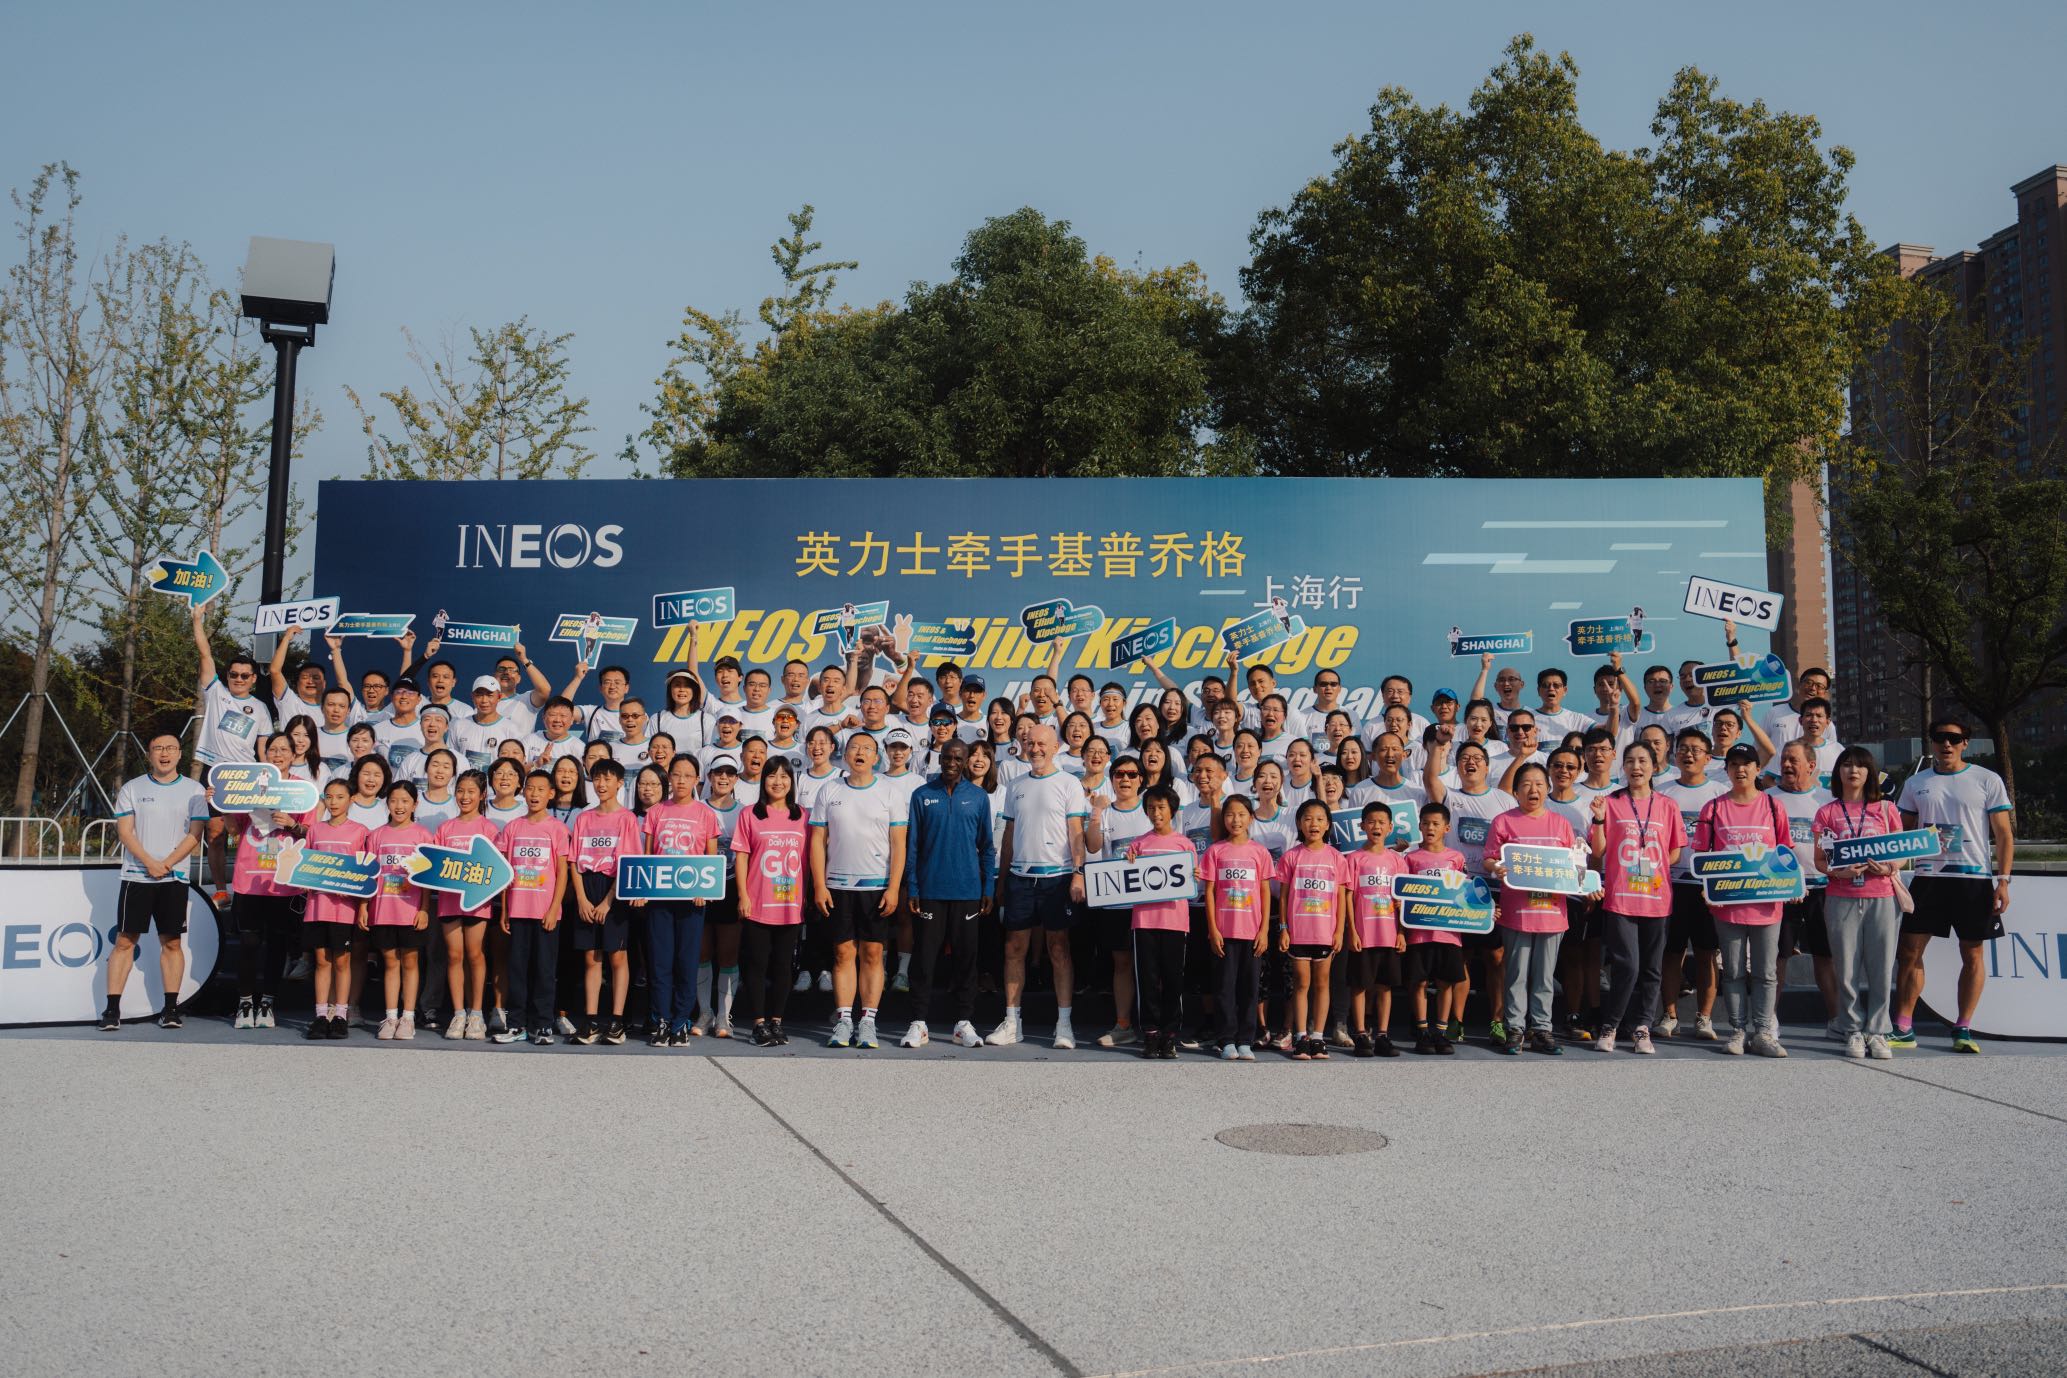 Eliud Kipchoge Visits Shanghai to Unveil China's First INEOA 1:59 Pace Challenge